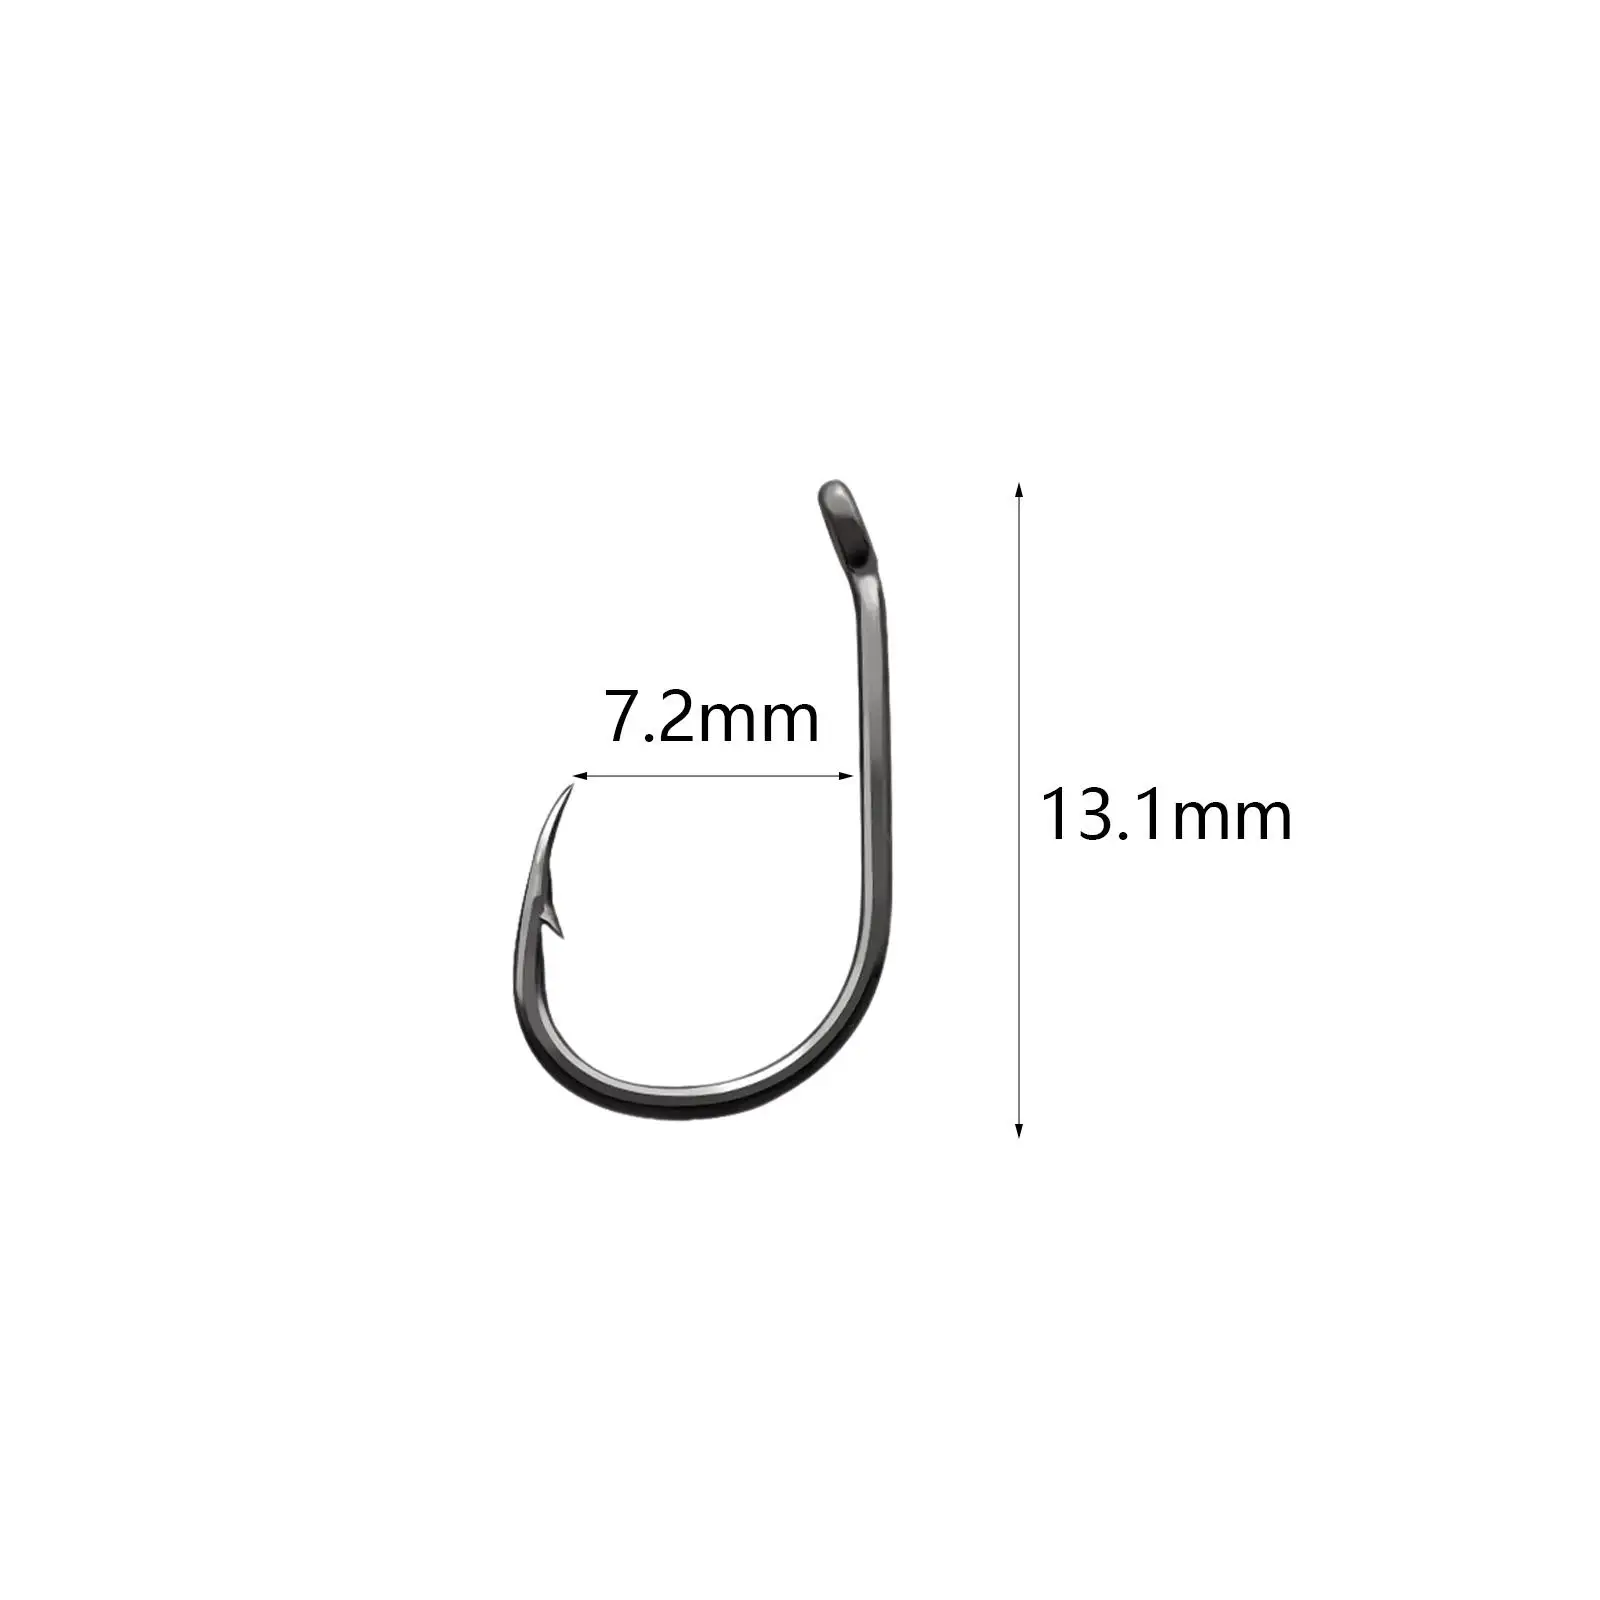 50x Barb Curved Fly Fishing Hooks Versatile Fishing Tackle Accessories Heavy Duty Supplies Fishing Tools Equipment for Dry Flies